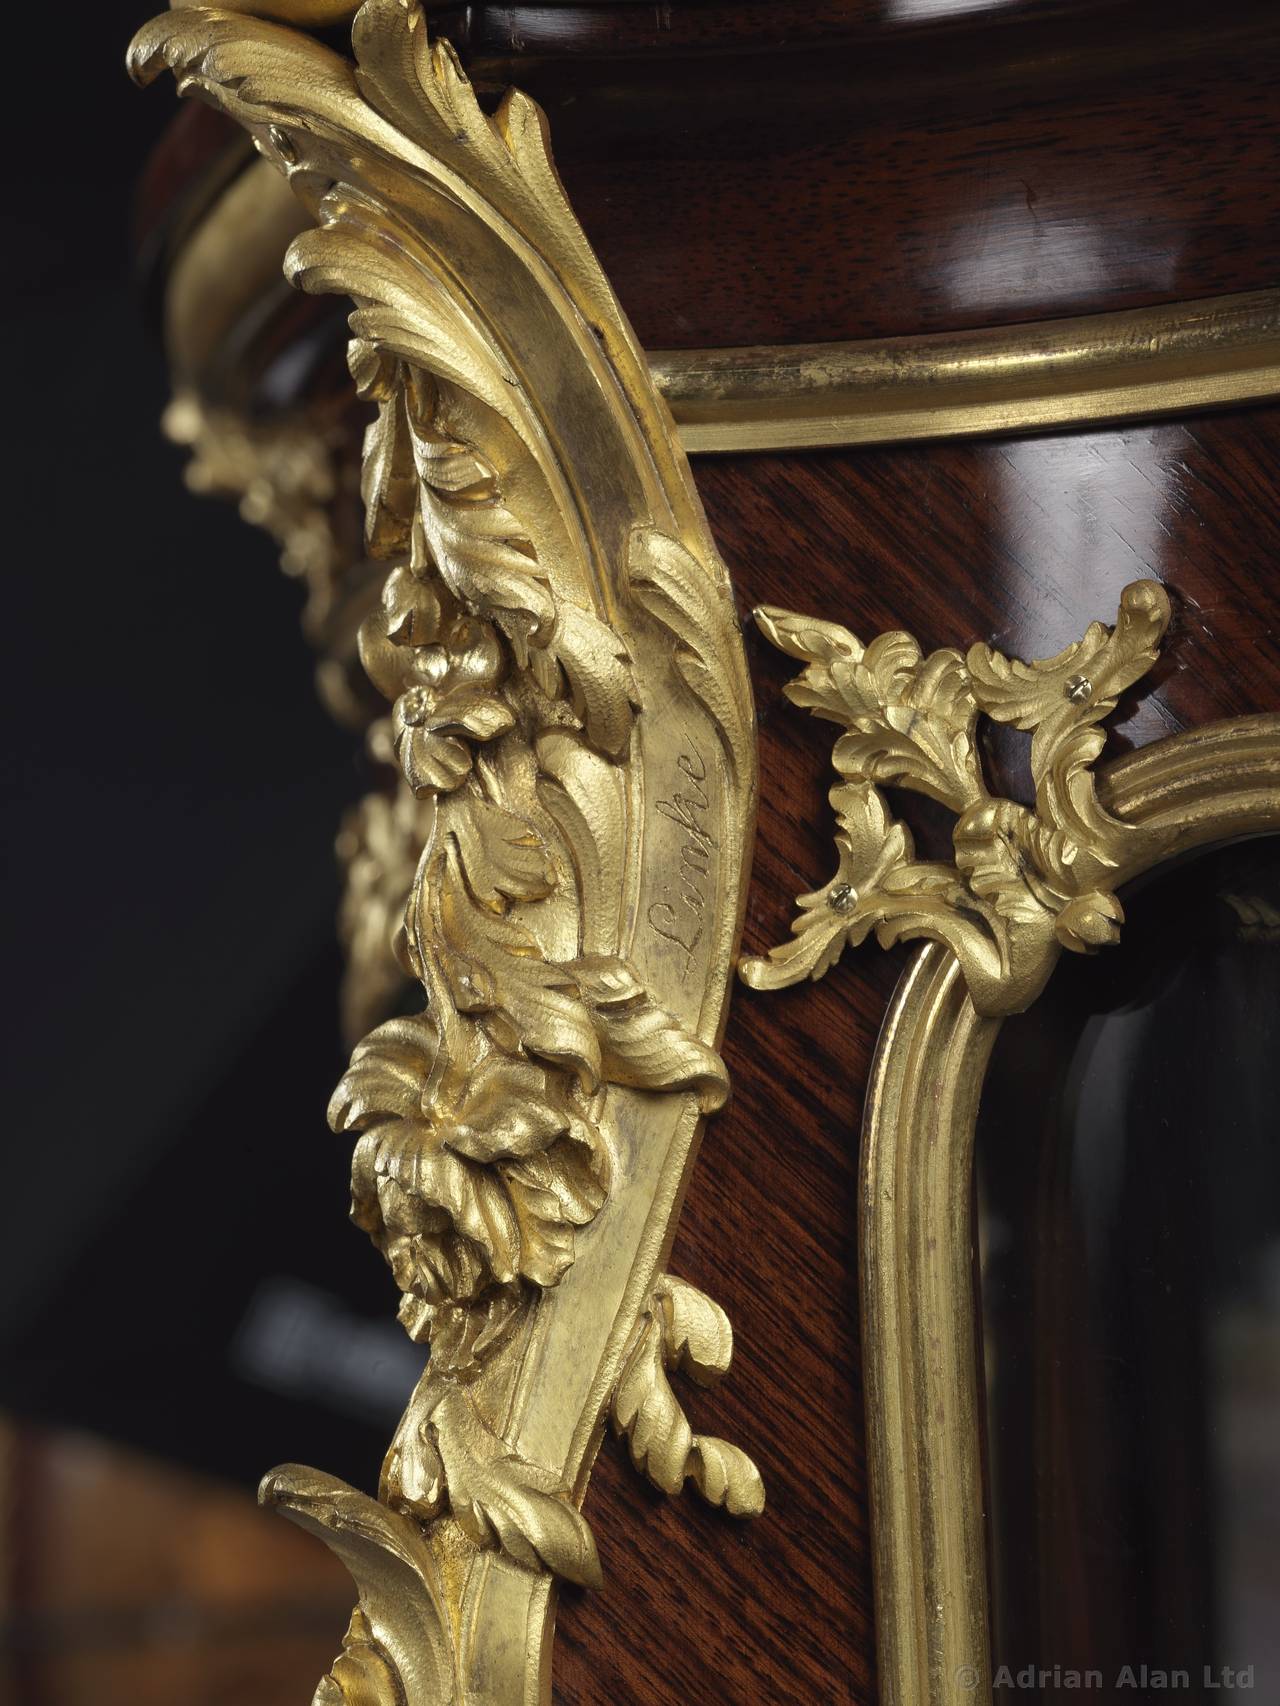 A fine Louis XV style gilt bronze-mounted Vitrine with a Brèche d’Alep Marble Top By Franc¸ois Linke

Signed to the reverse of the lock ‘CT LINKE/ PARIS’.
Linke index number 208.

This elegant vitrine has a moulded and shaped Bre`che d’Alep marble